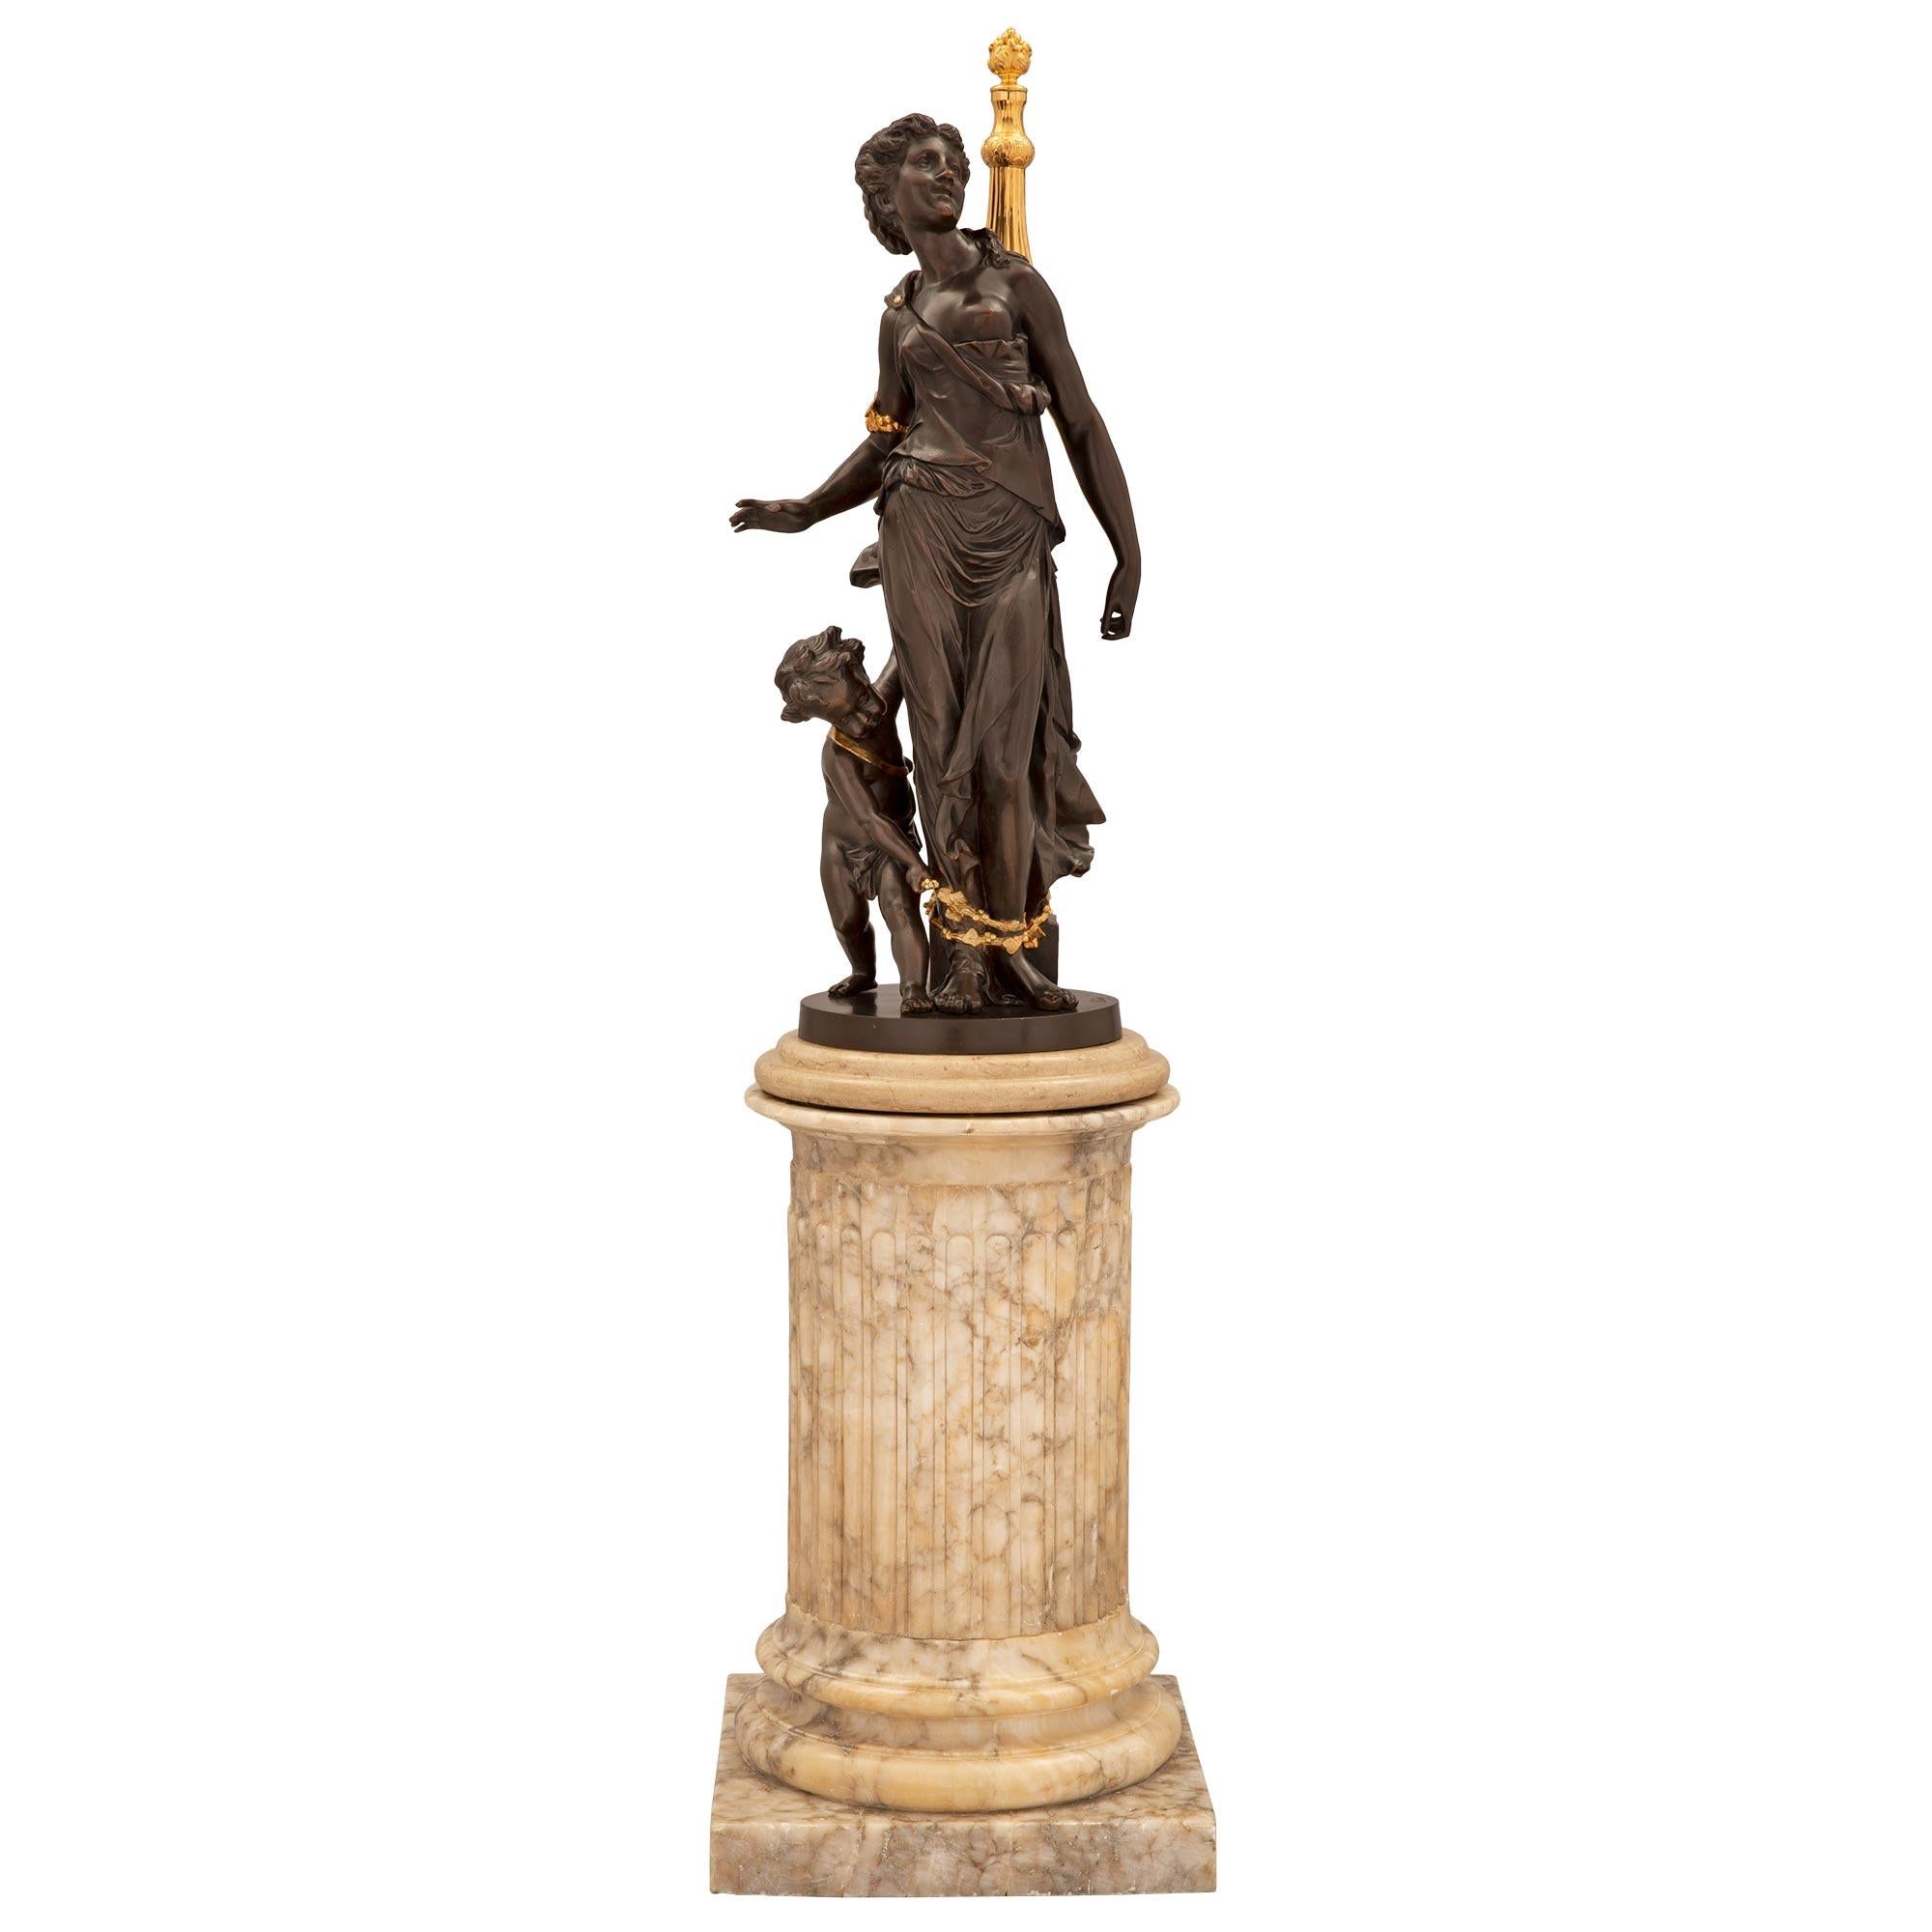 A charming and very high quality French 19th century Louis XVI st. patinated bronze, ormolu, and Notre Dame marble statue signed Clodion. The statue is raised on an elegant Notre Dame marble pedestal with a square base and fine circular central